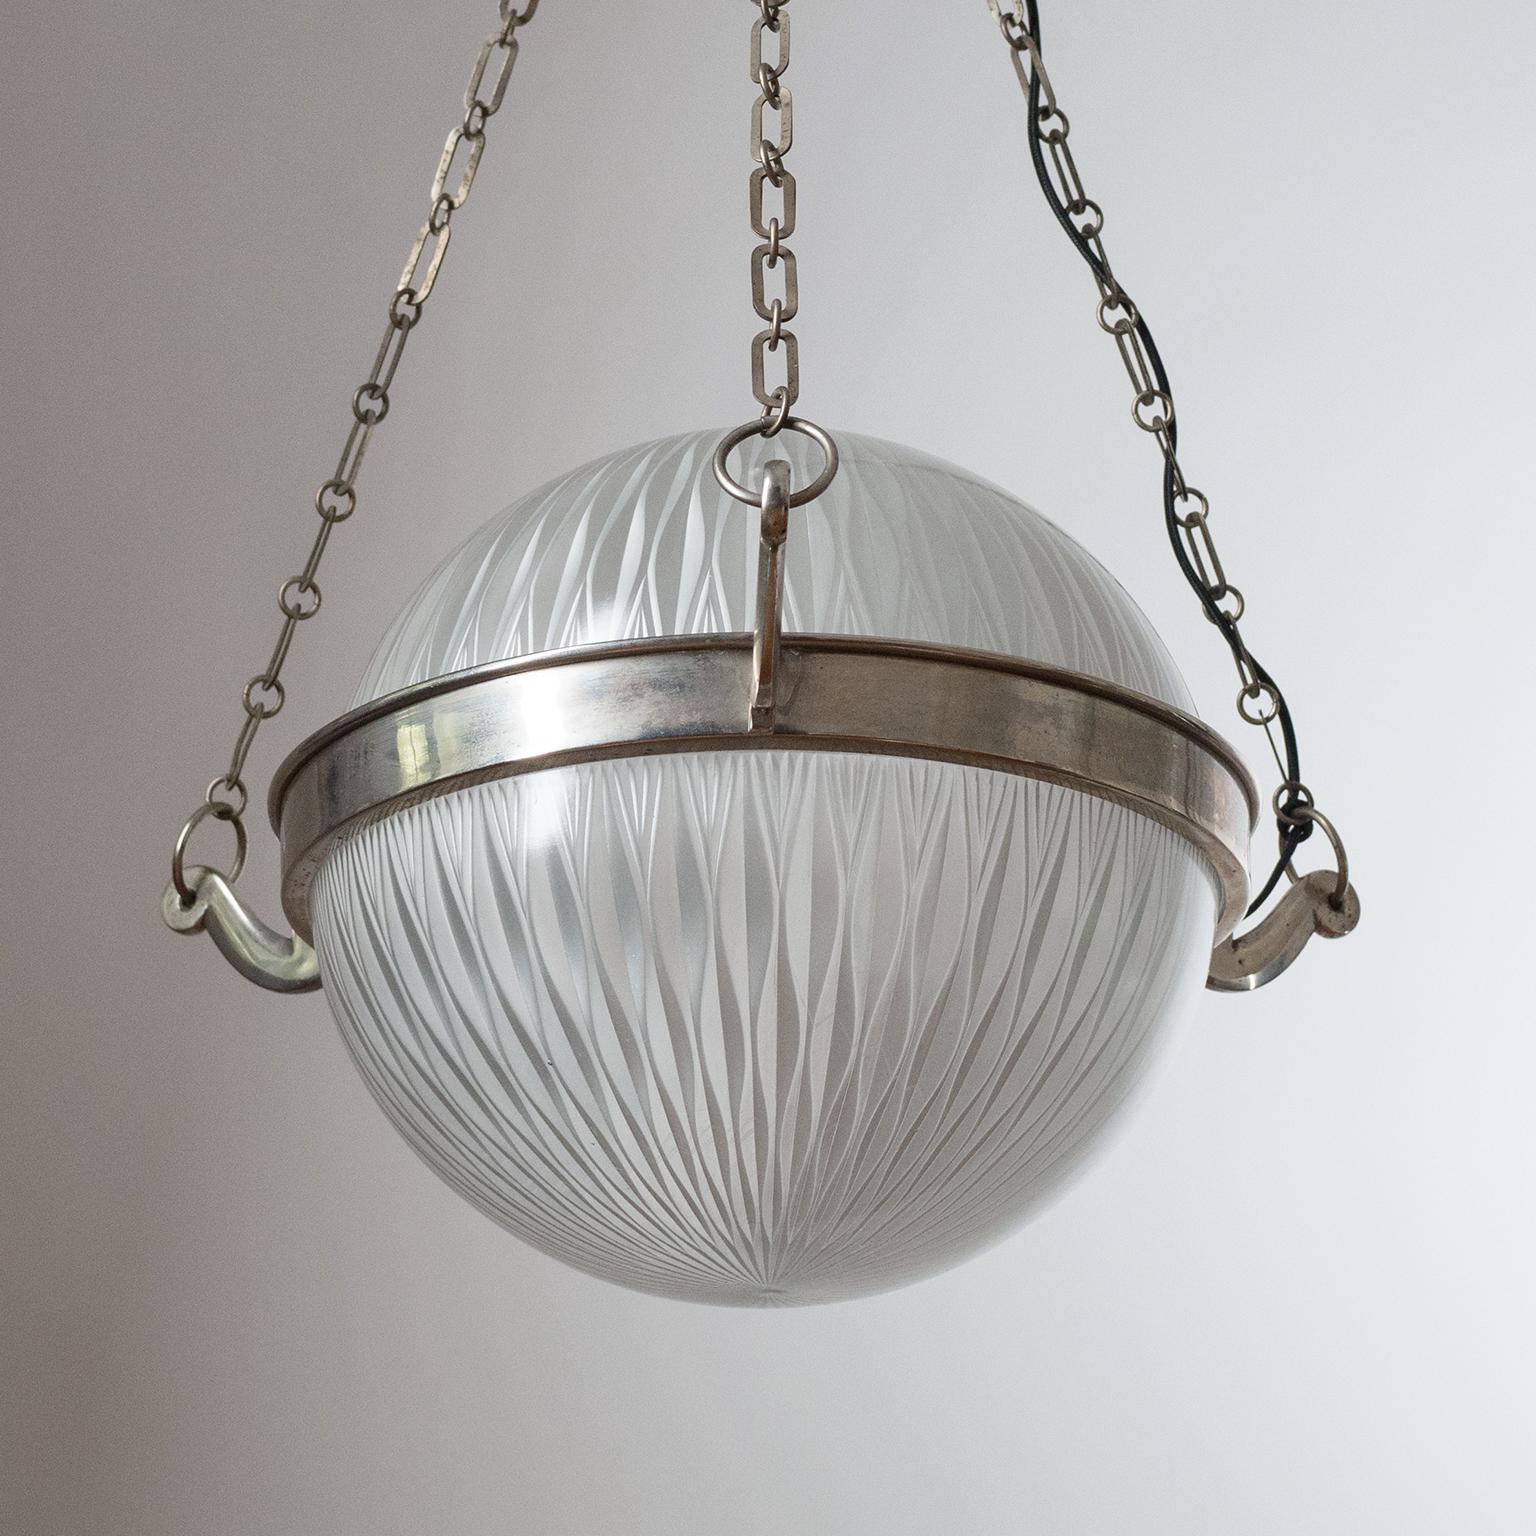 Early 20th Century Art Deco Suspension Light, circa 1920, Nickel and Holophane Glass